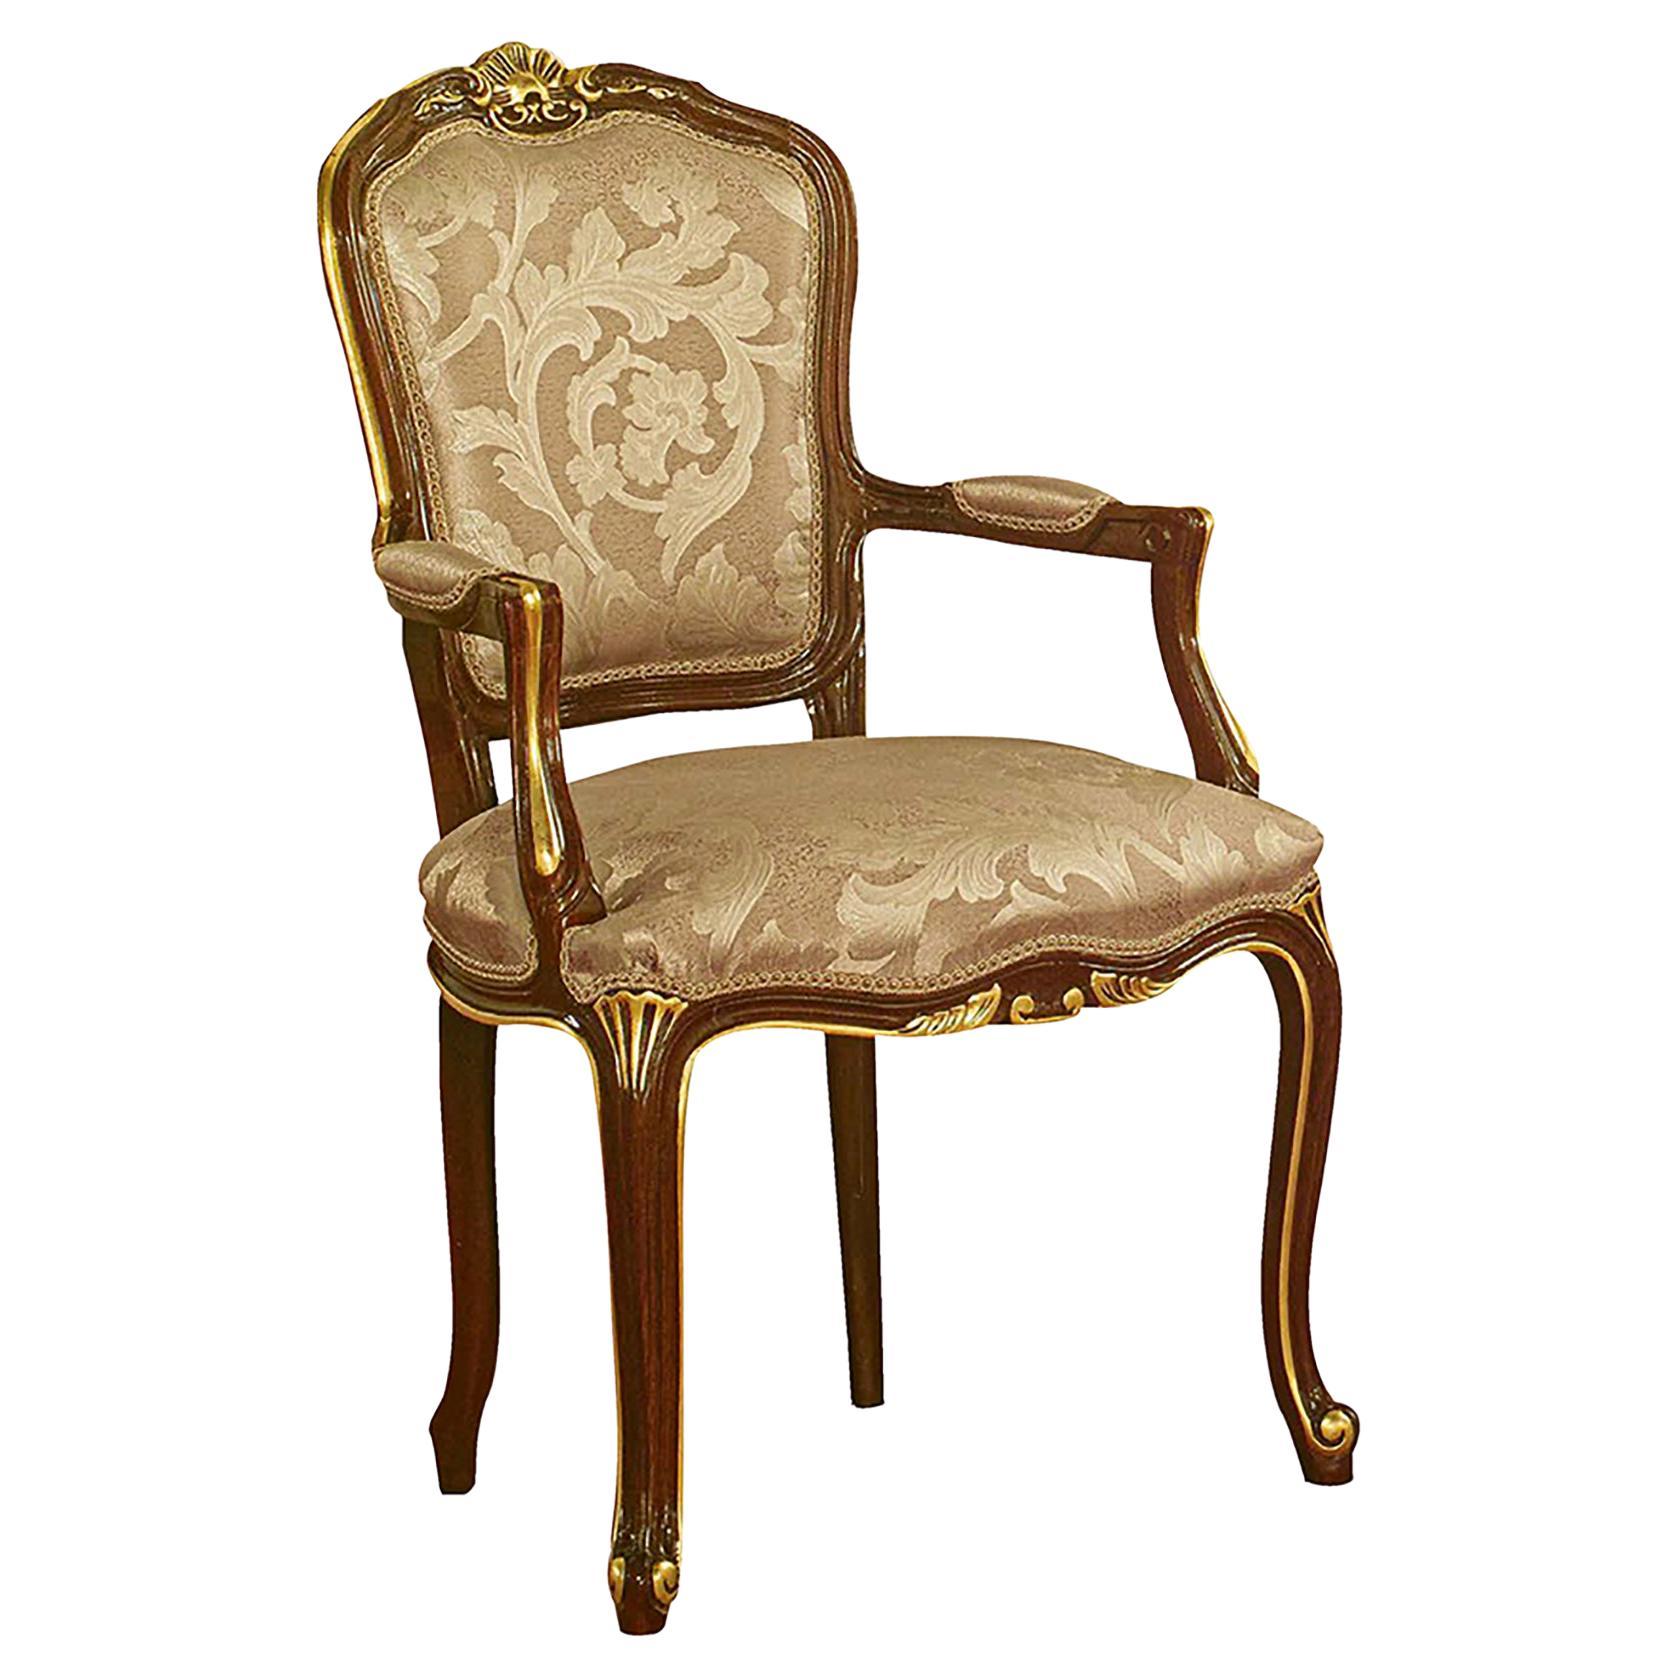 Baroque Chair with Armrest in Natural Wood Walnut and Gold Leaf Finish For Sale